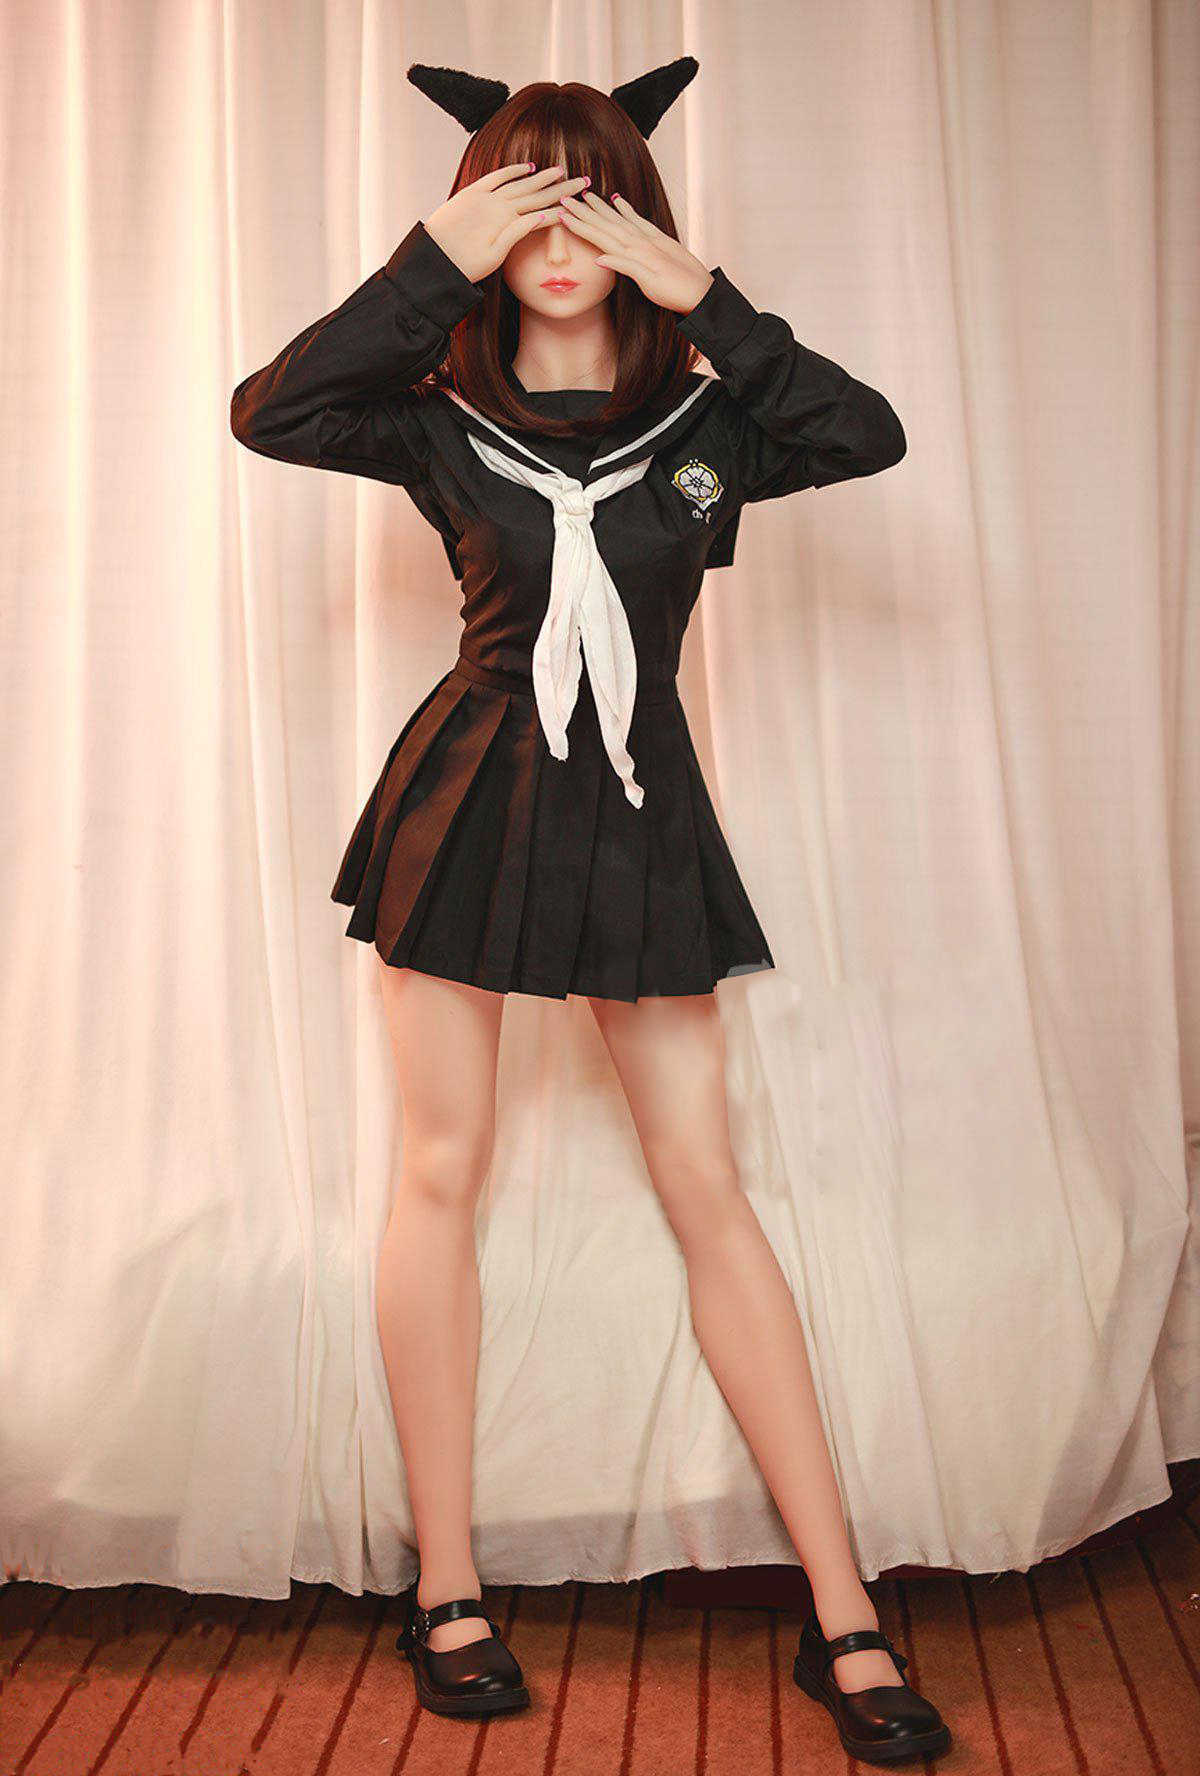 Lilly-Cute-Asian-Sex-Doll-13